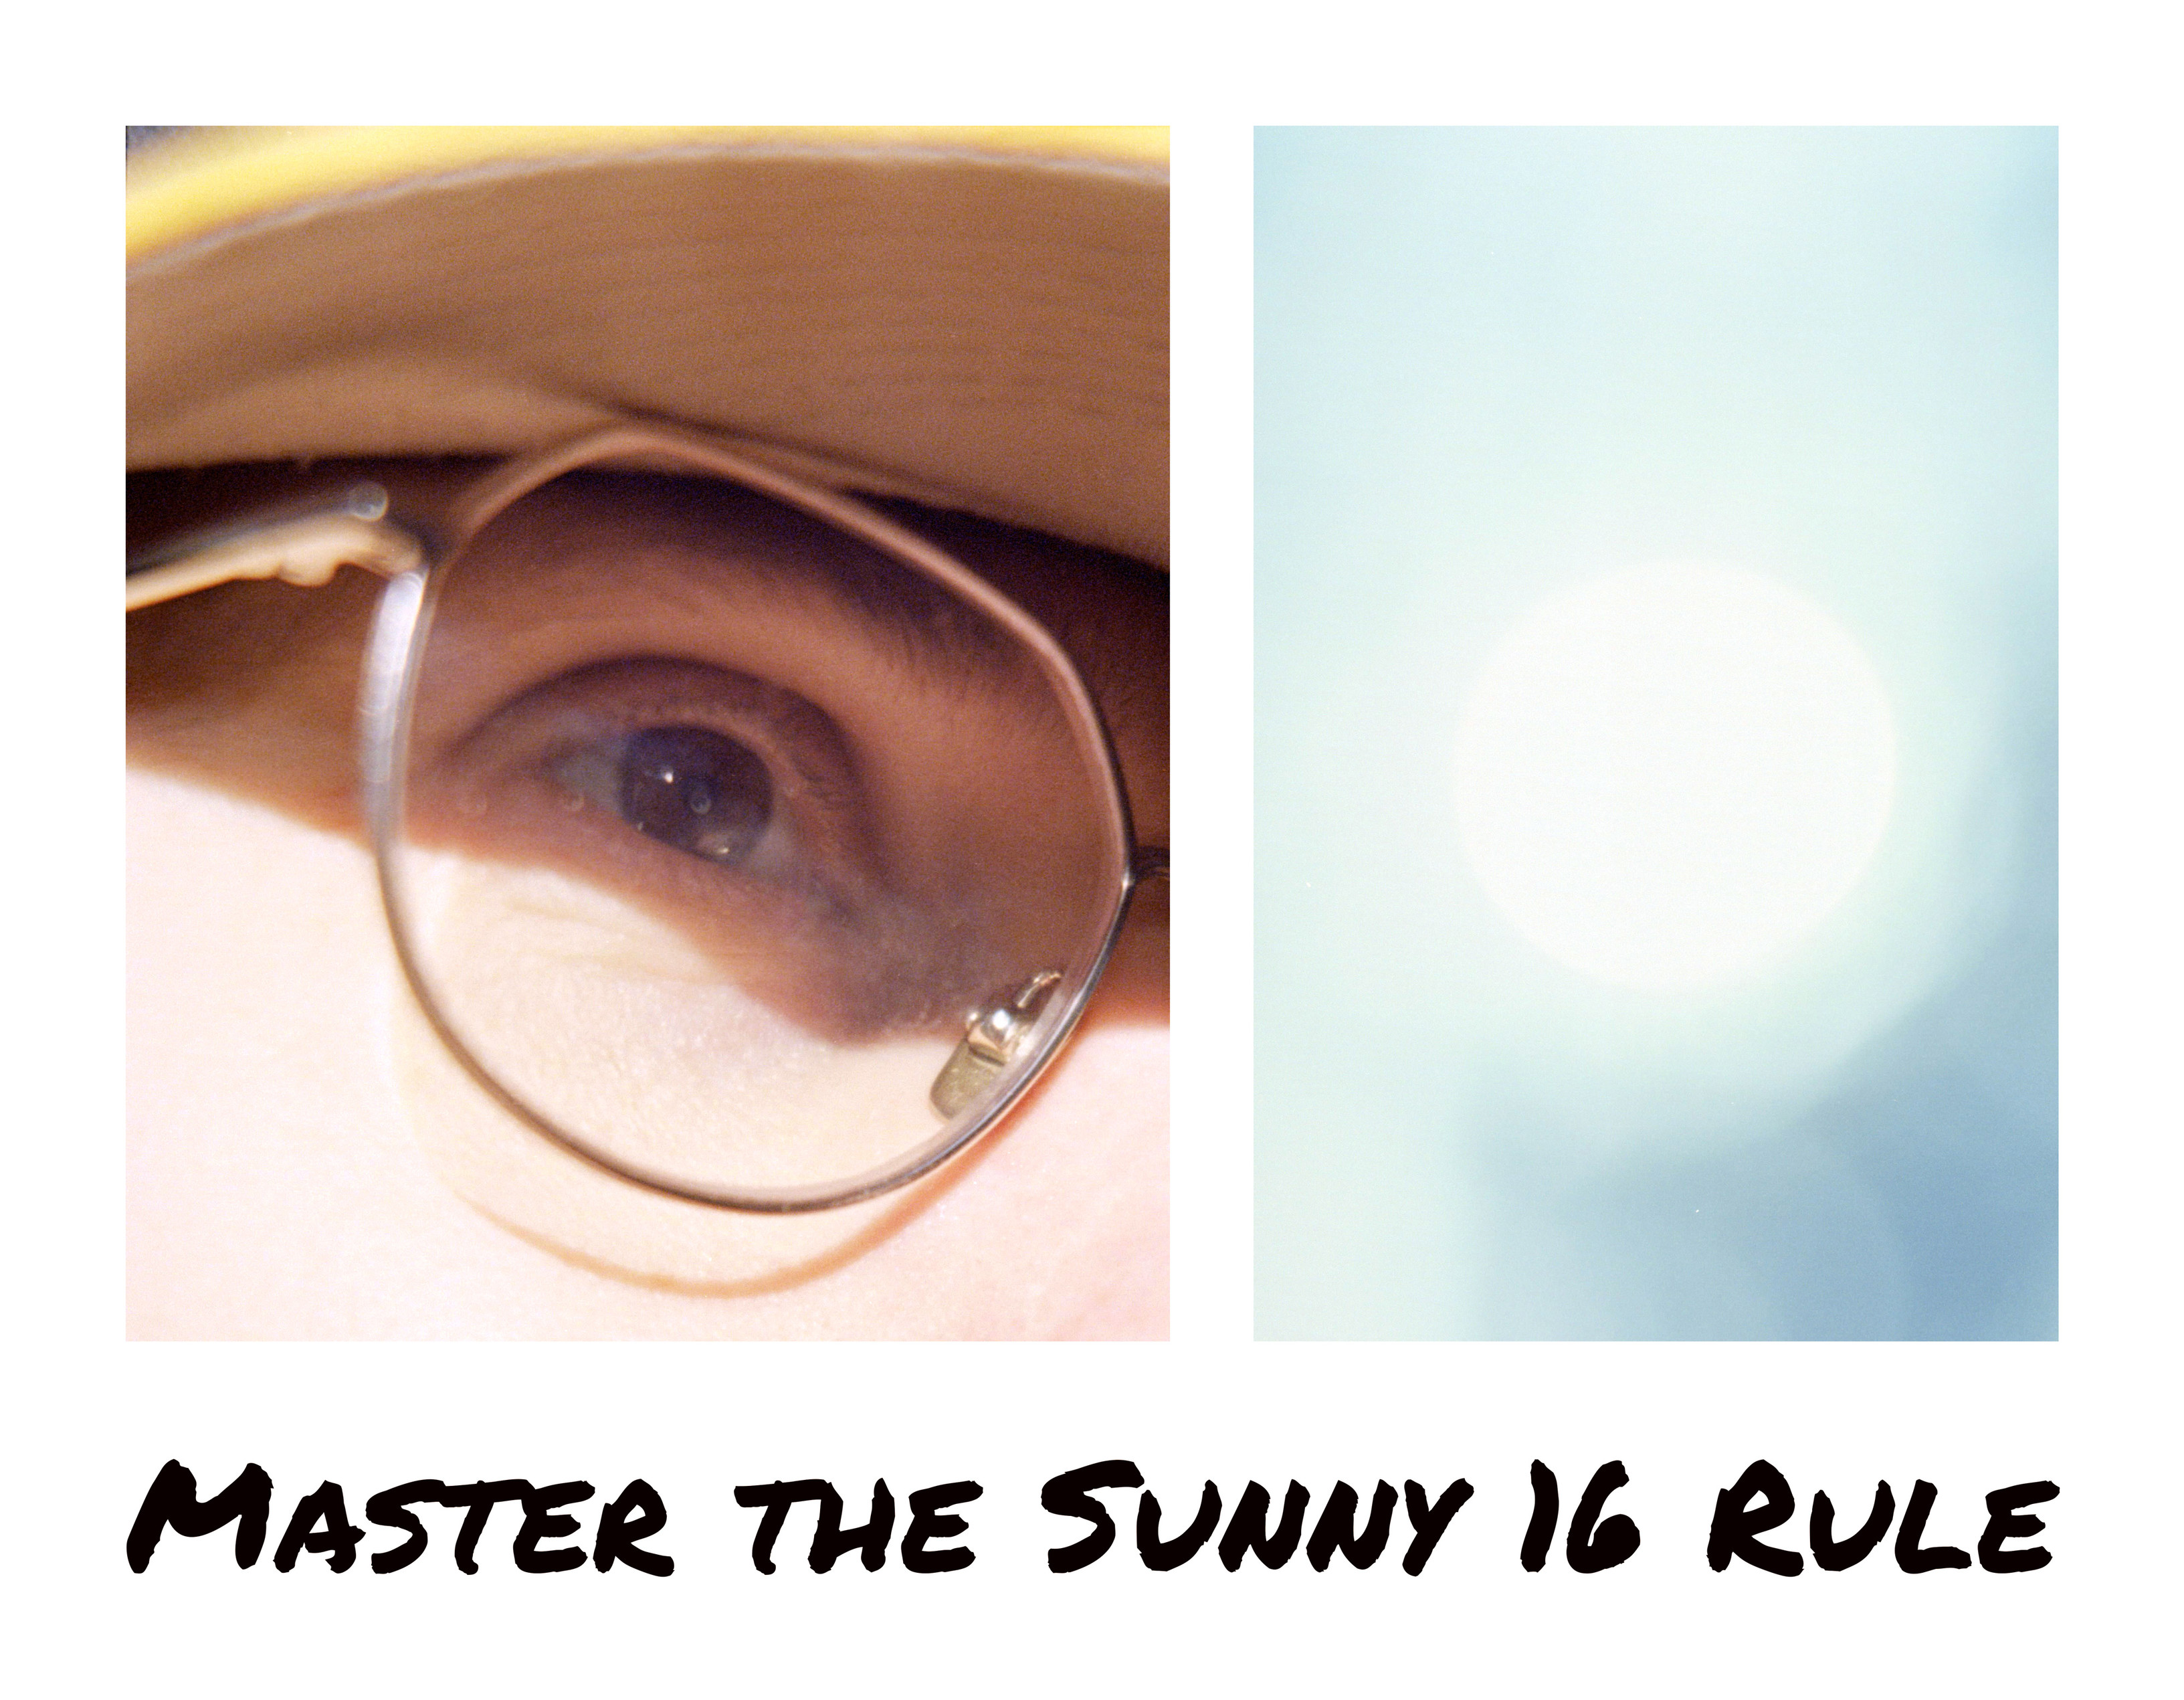 A close-up photo of my eye with the caption "Master the Sunny 16 Rule"